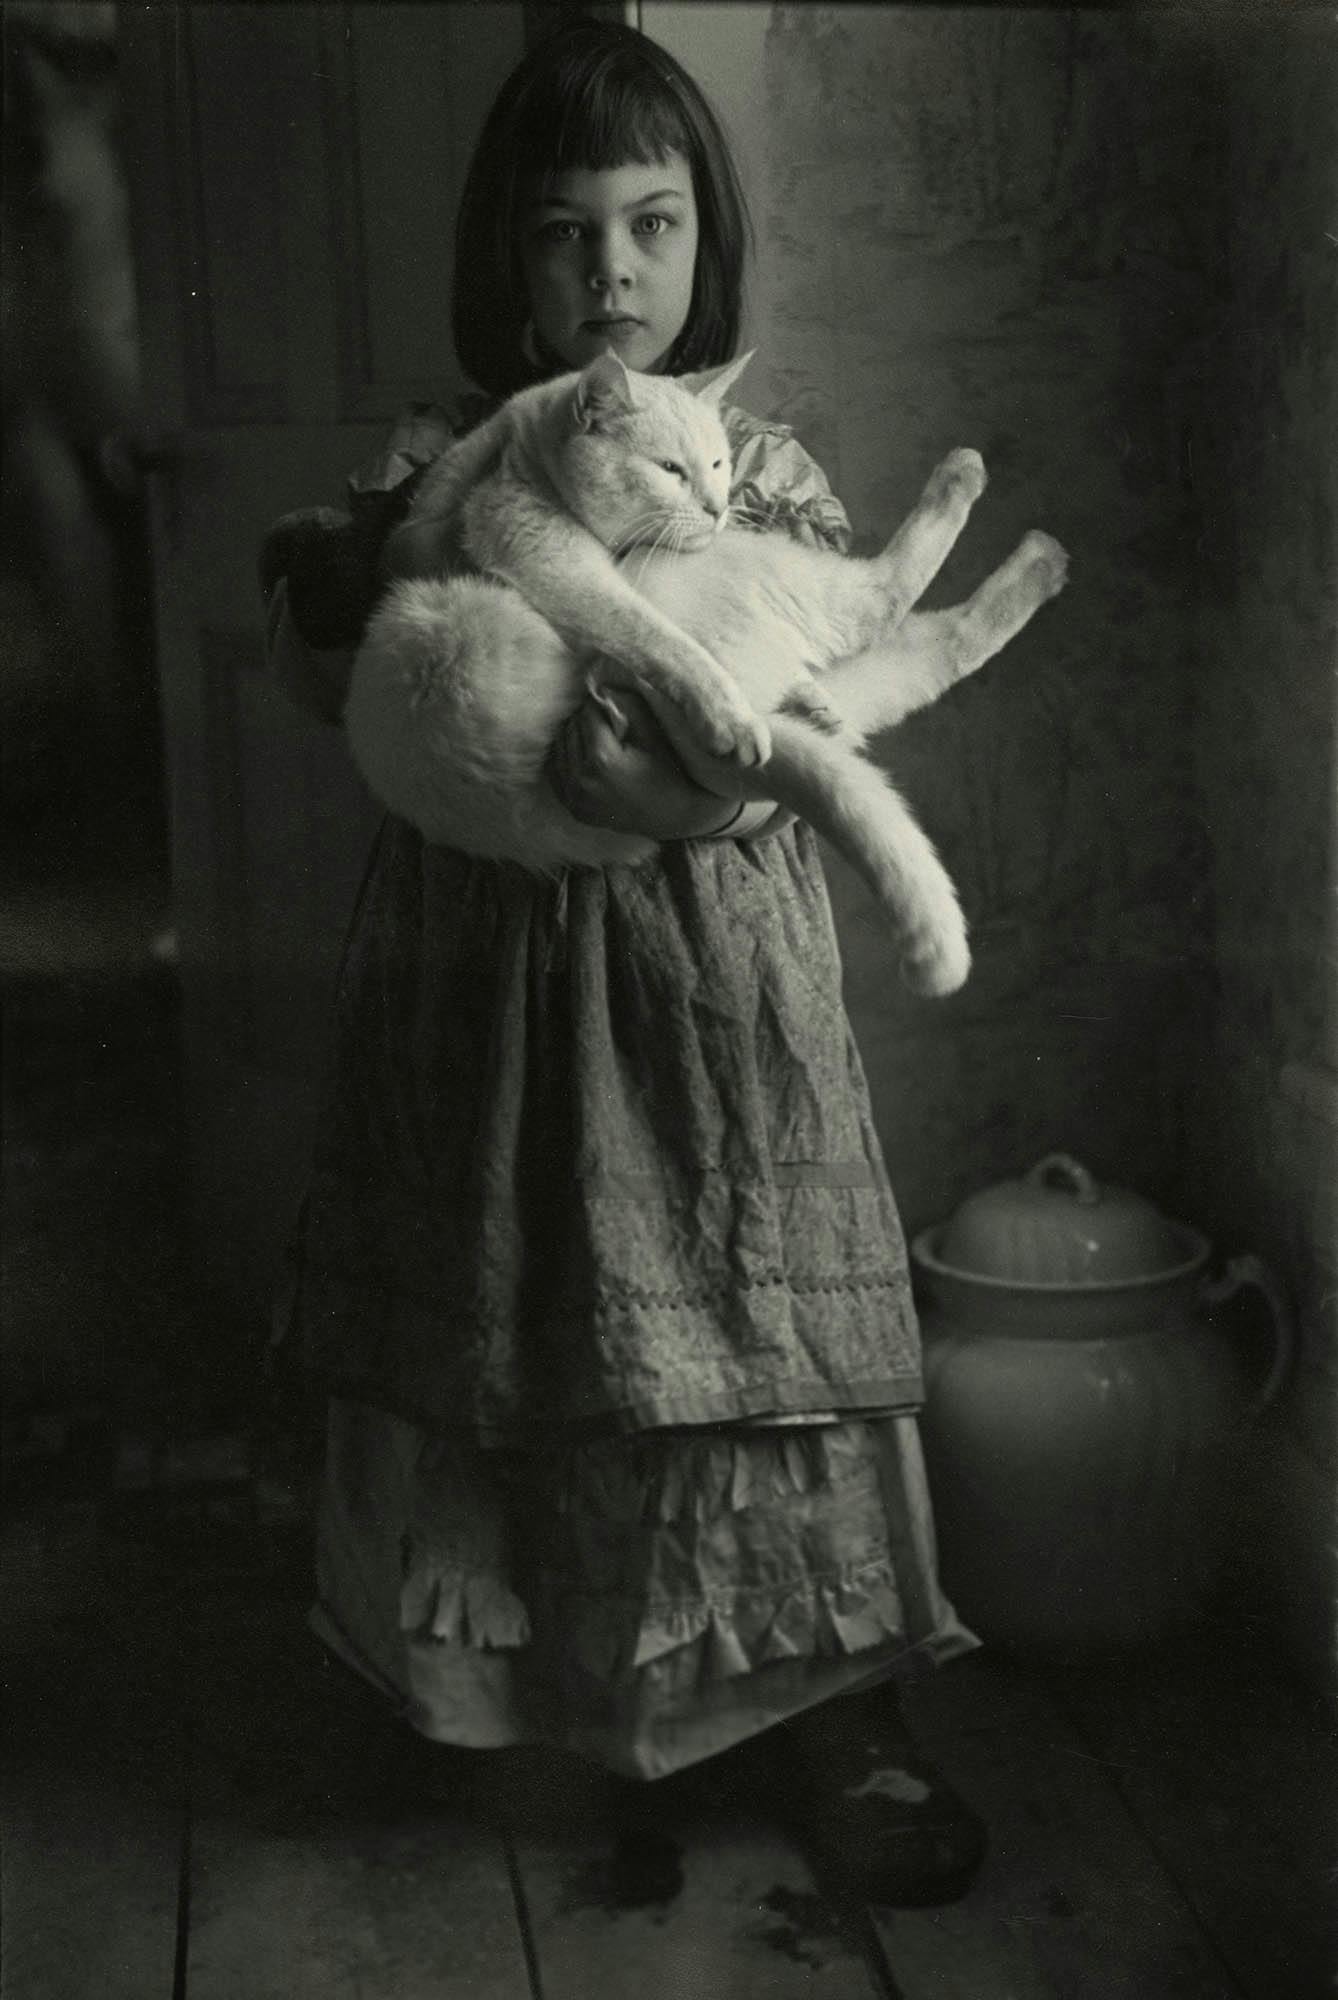 _[Joanna with Cat](https://pousette-dartfoundation.org/works/joanna-with-cat/)_, 1952, gelatin silver print, 13 ½ x 9 in. (34.3 x 22.9 cm)
 – The Richard Pousette-Dart Foundation